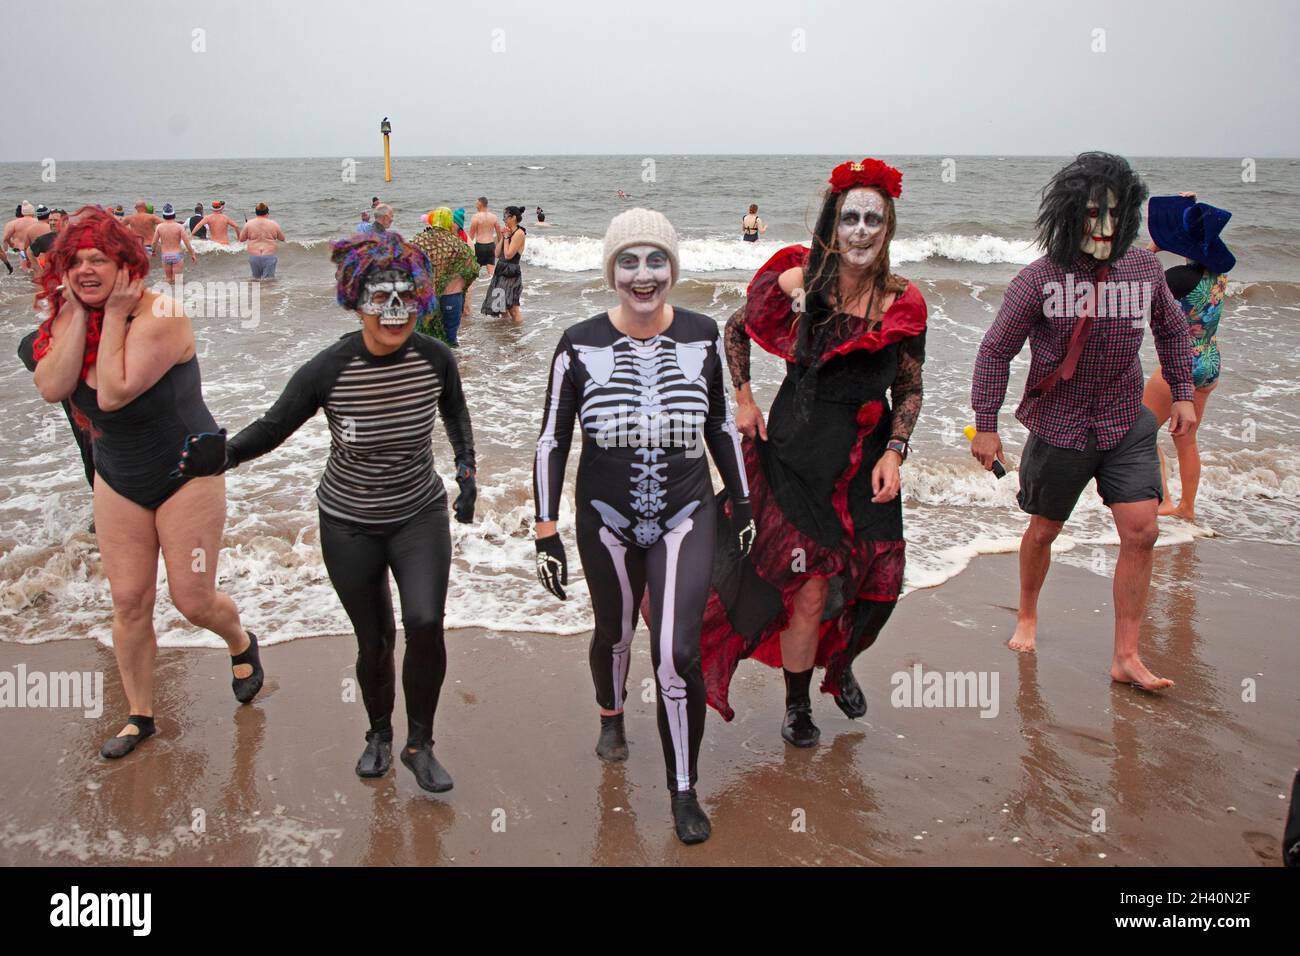 Portobello, Edinburgh, Scotland, UK. 31st October 2021. Spooktacular dip at  seaside this Halloween. To celebrate the launch of Scottish authors Anna  Deacon and Vicky Allan's new expert guide on The Art of